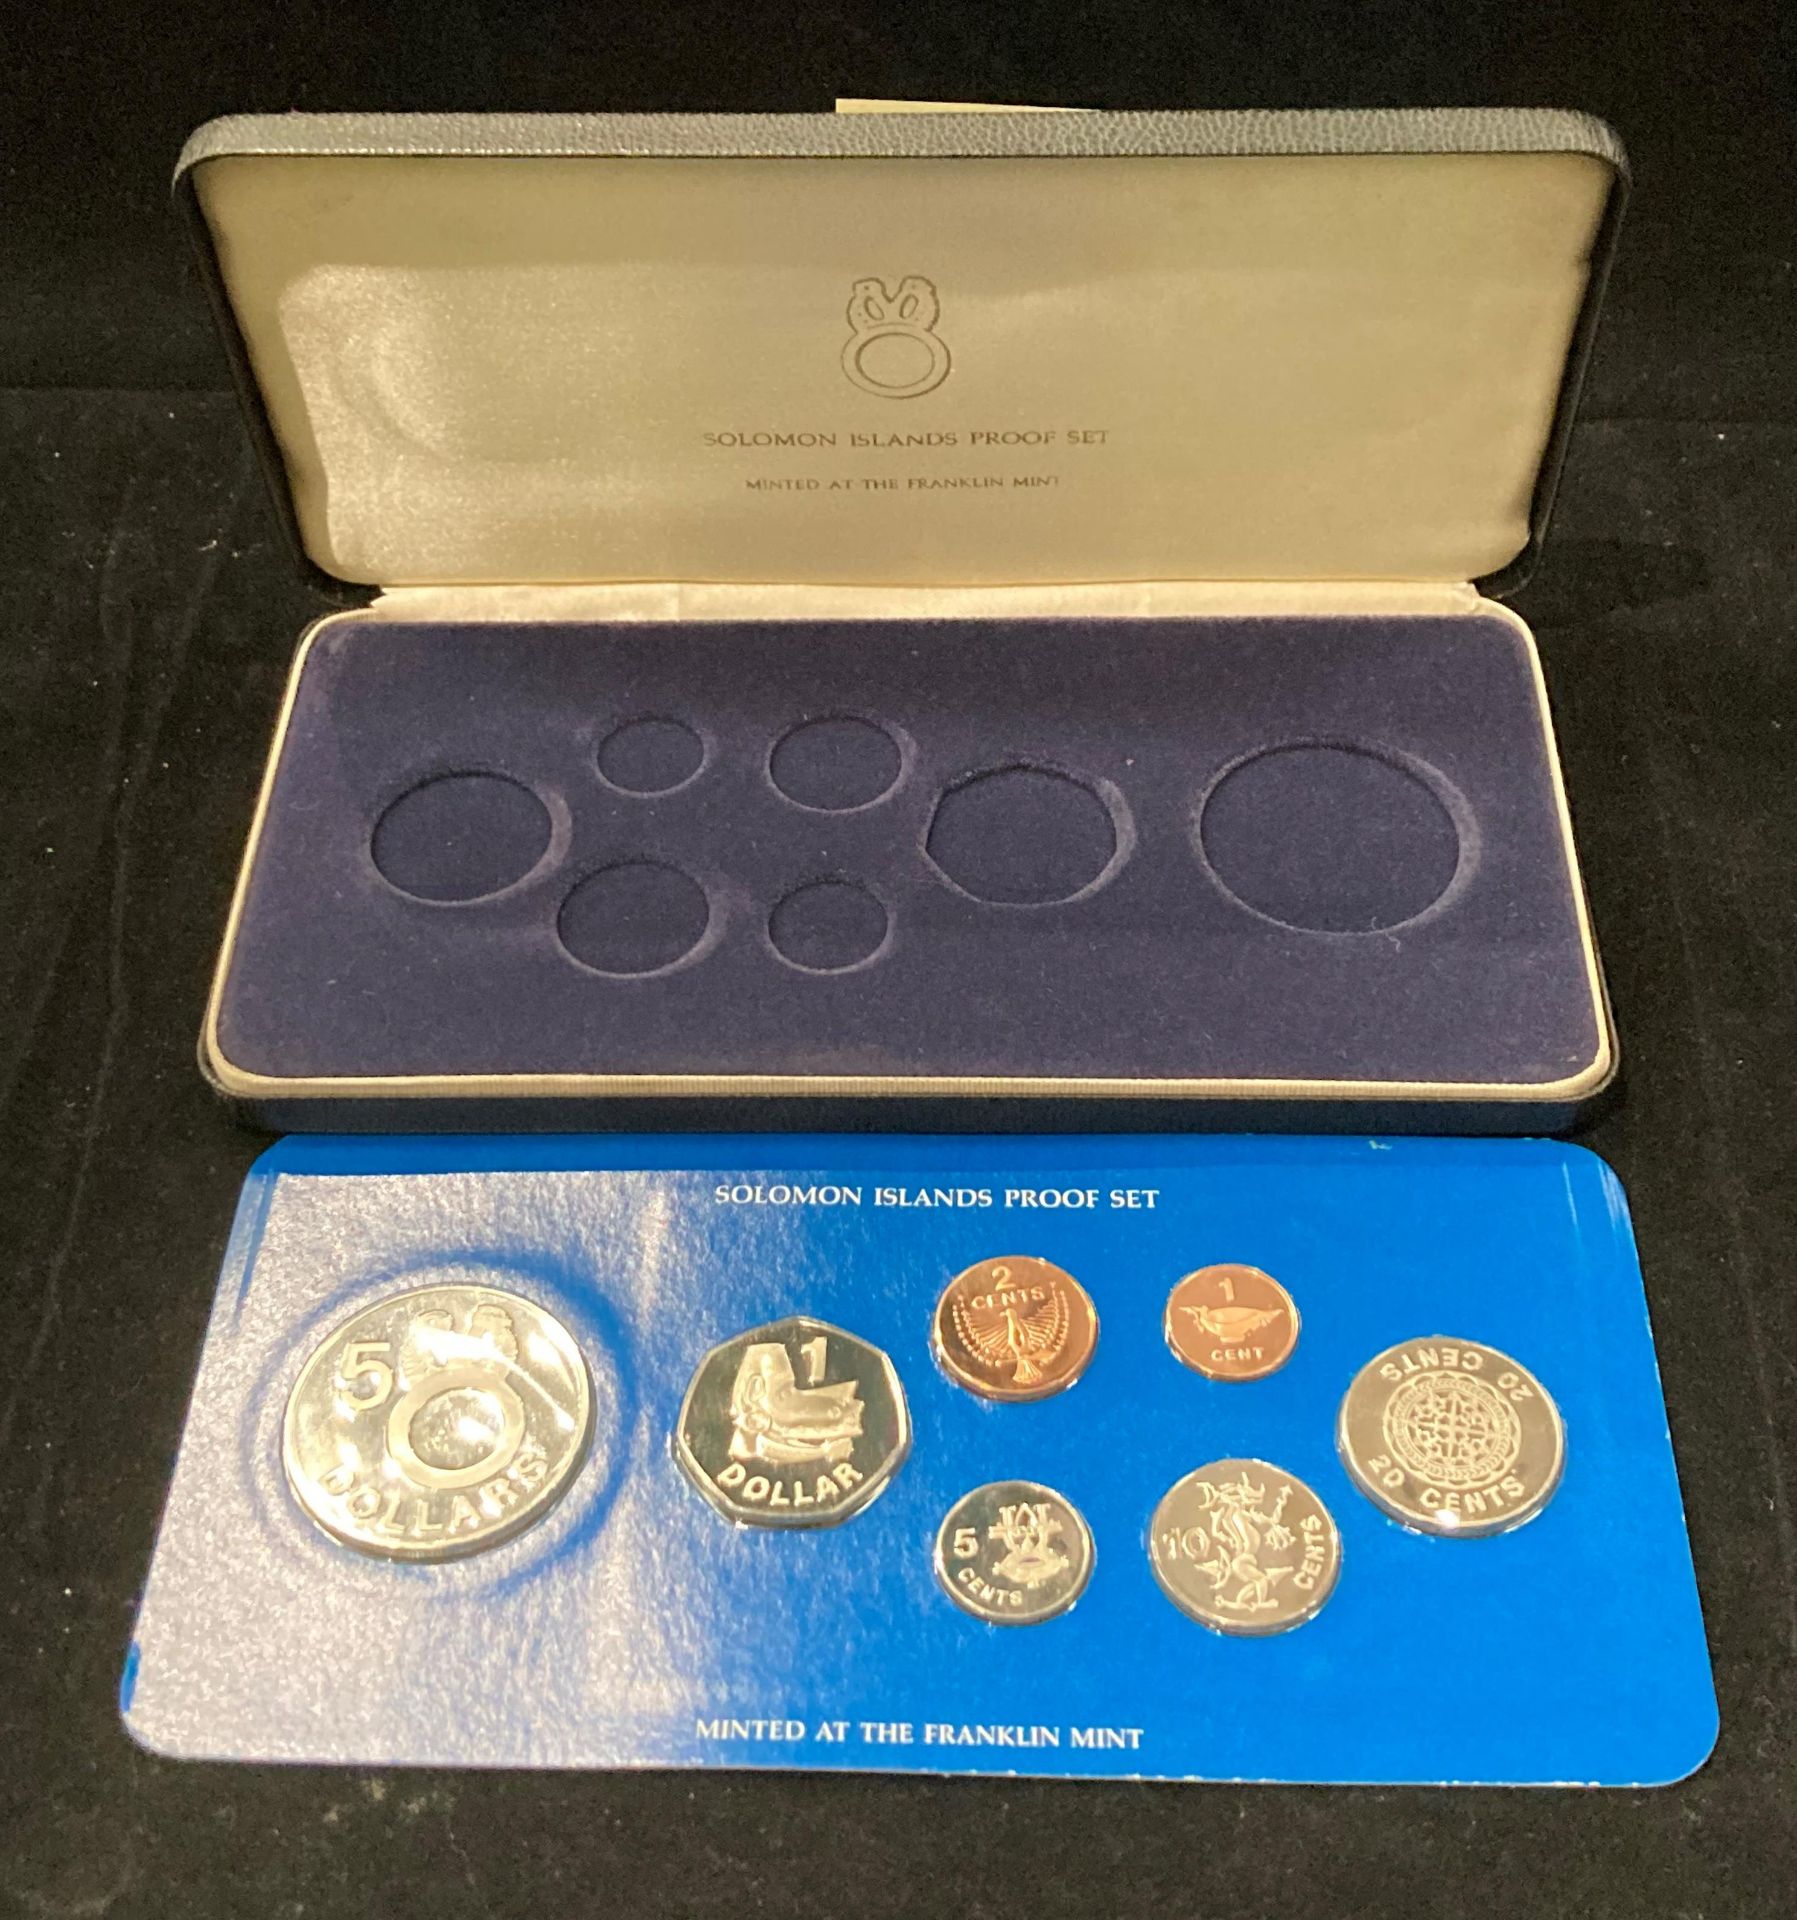 A Solomon Islands 1997 seven coin proof set minted at the Franklin Mint - cased.